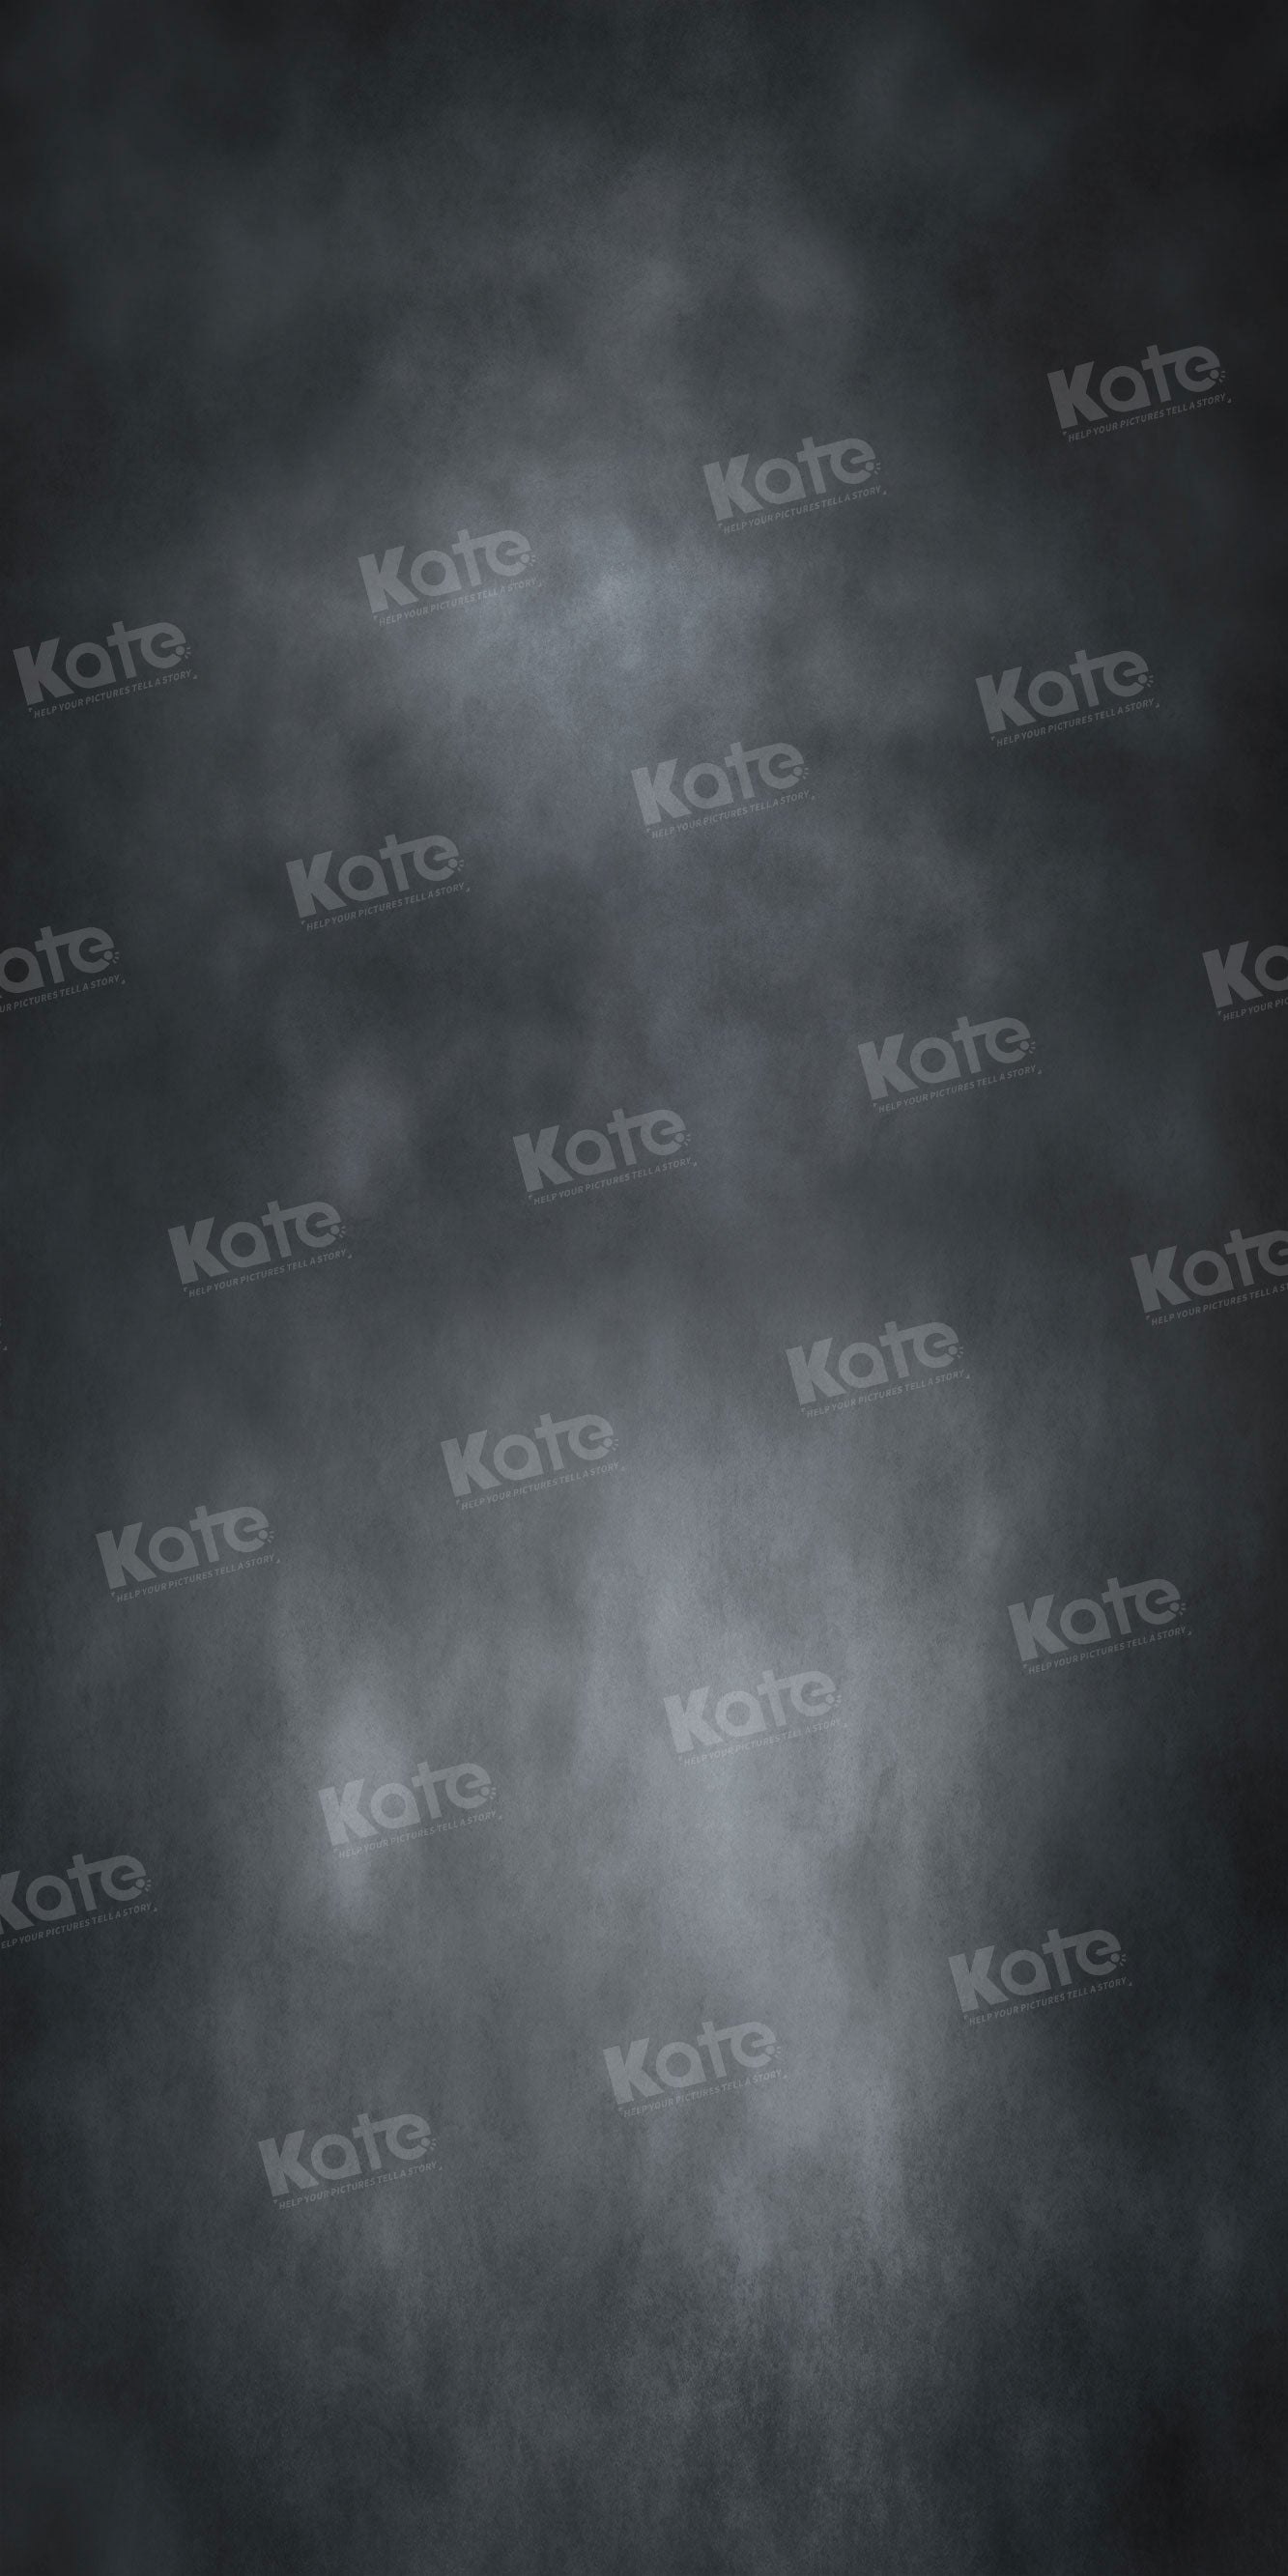 Kate Sweep Abstract Dark Gray Texture Backdrop for Photography